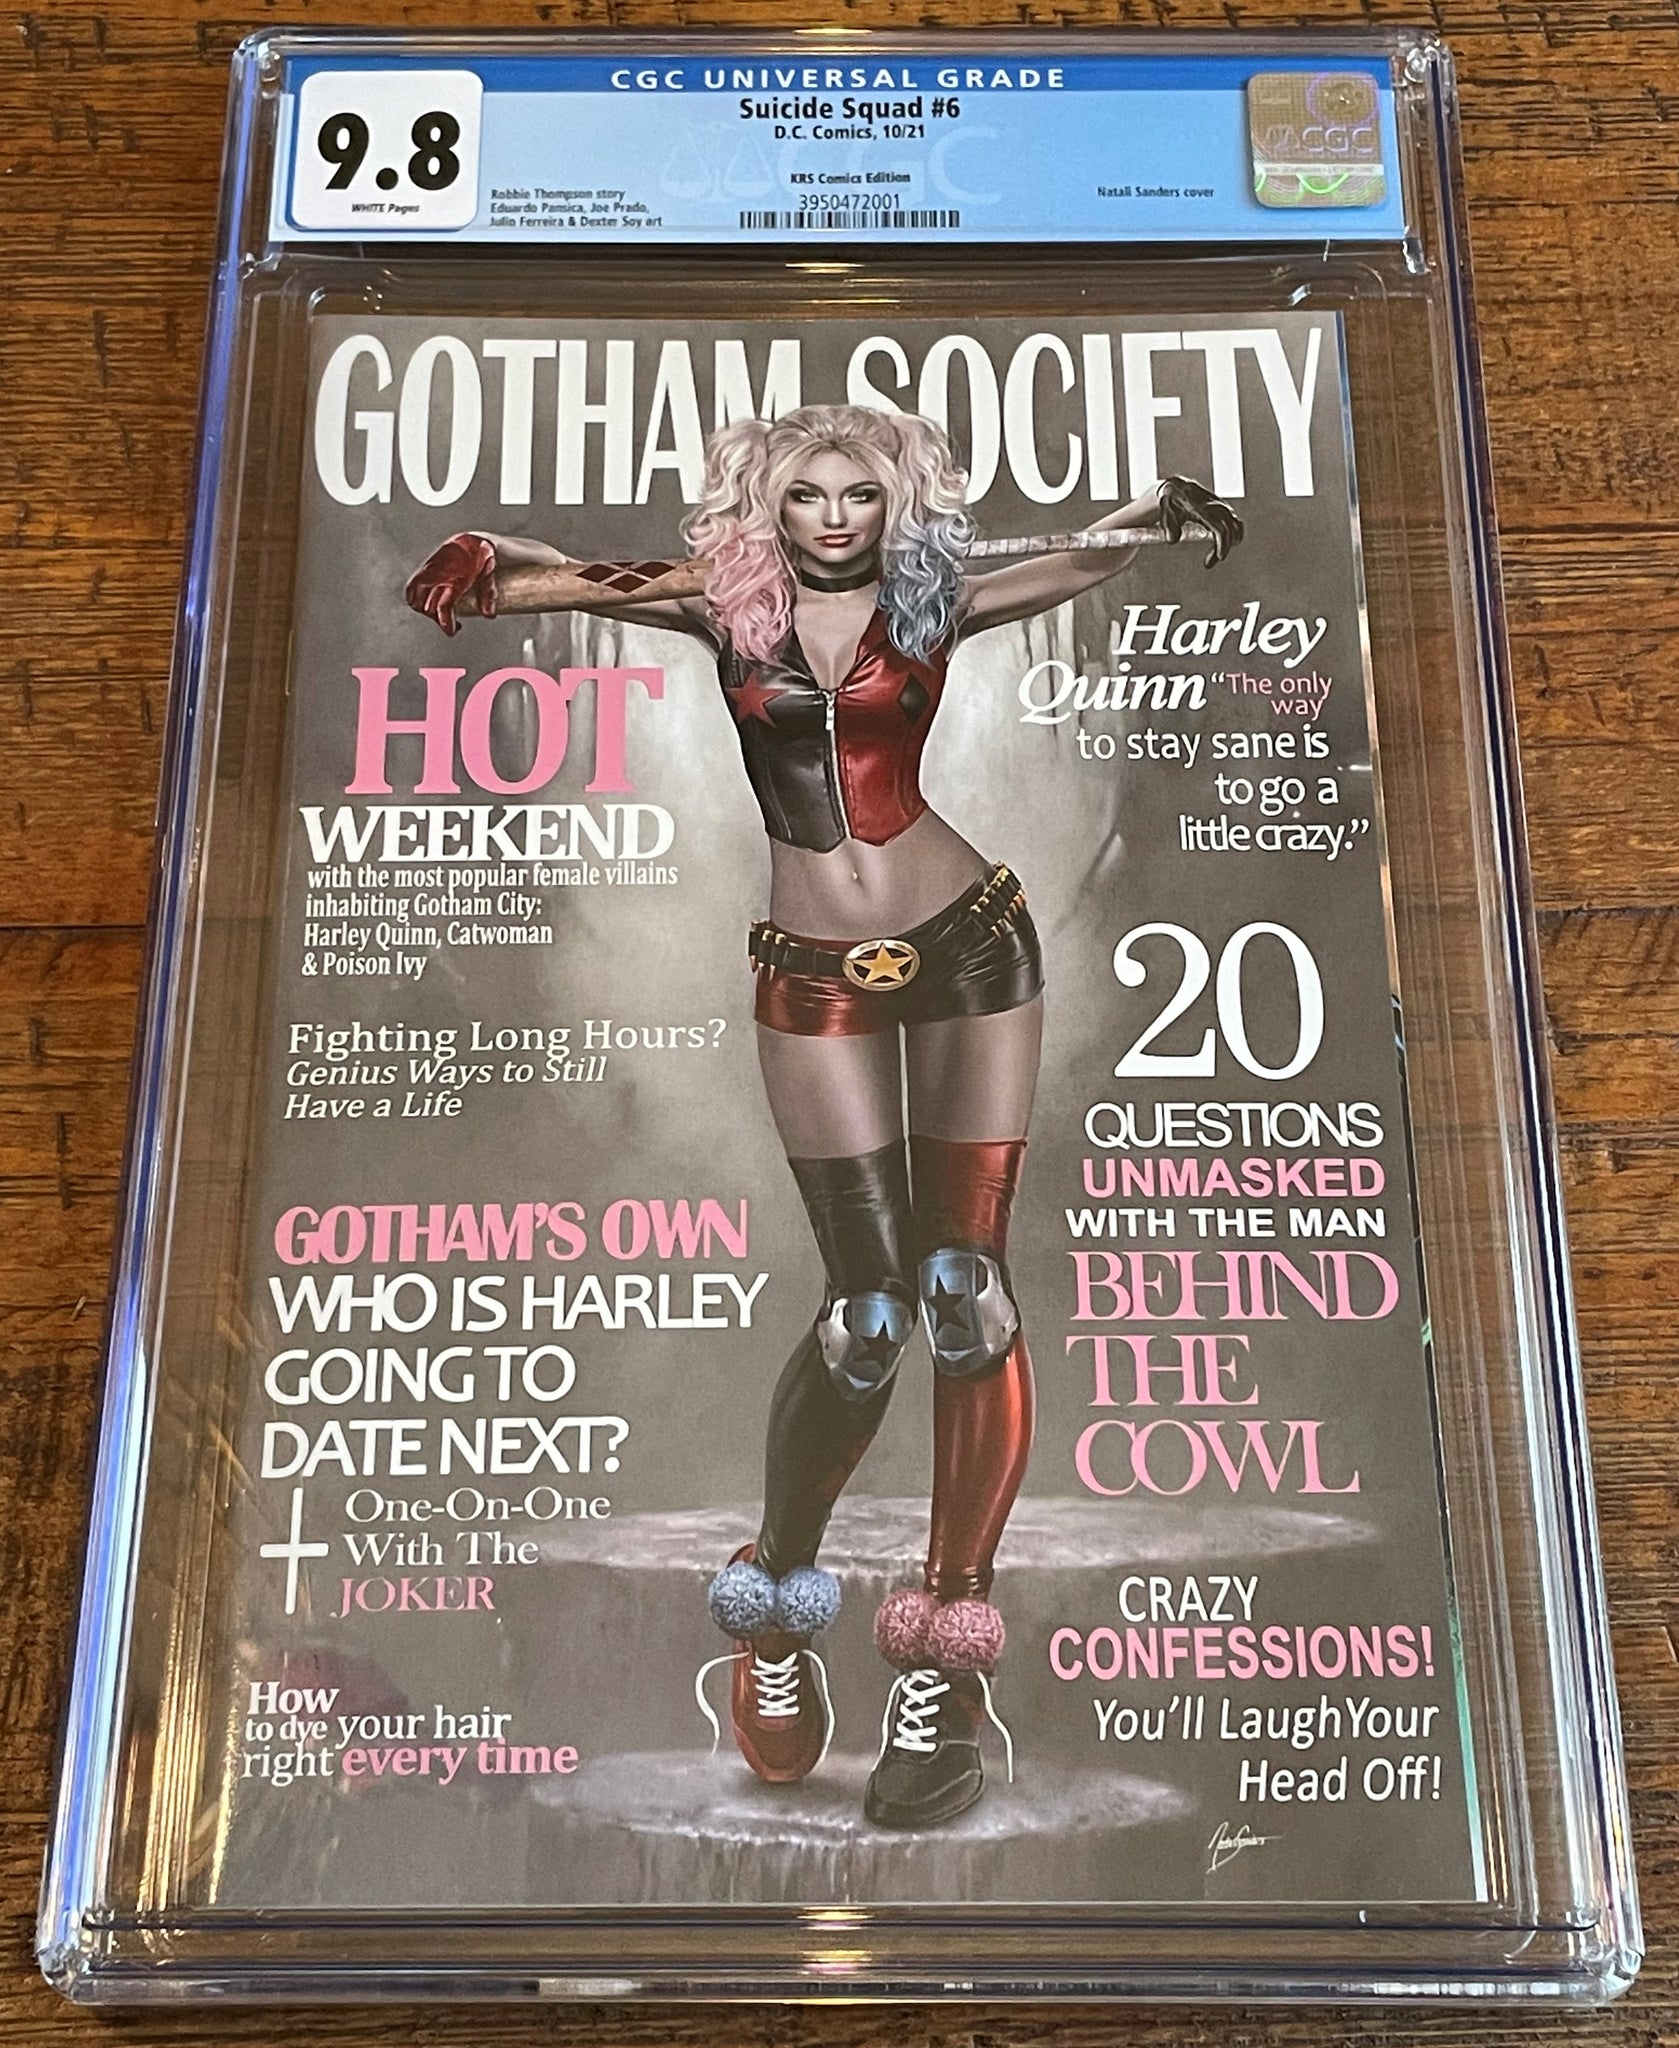 SUICIDE SQUAD #6 CGC 9.8 NATALI SANDERS HARLEY QUINN MAG TRADE DRESS VARIANT-A